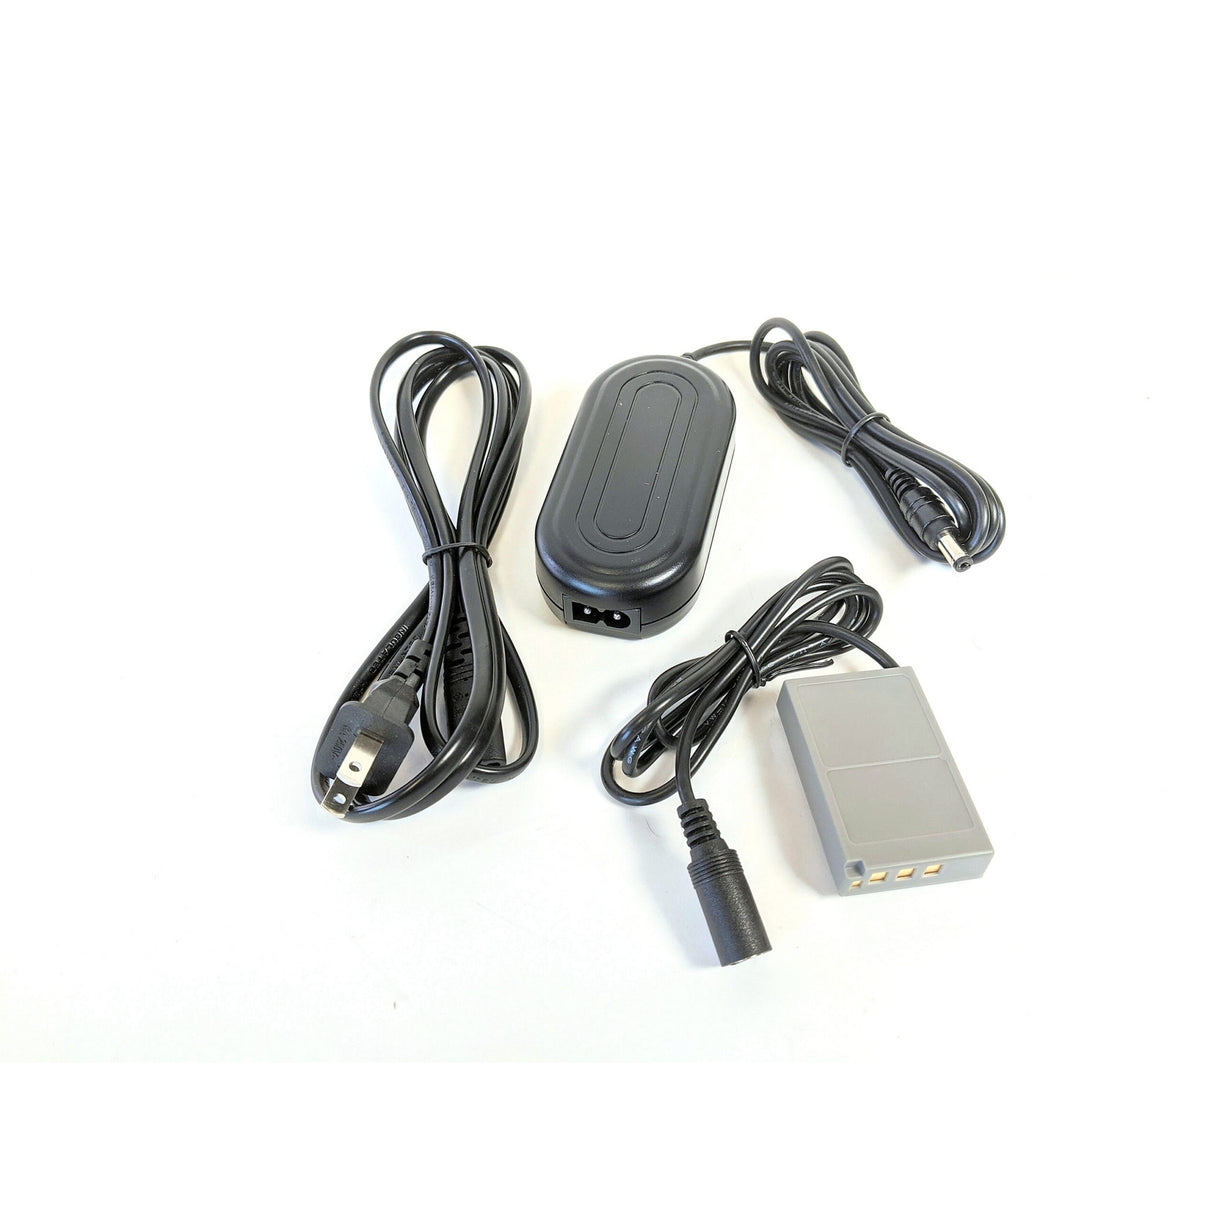 Bescor BLS50AC Olympus Style BLS50 Coupler/Dummy Batter and AC Adapter Kit